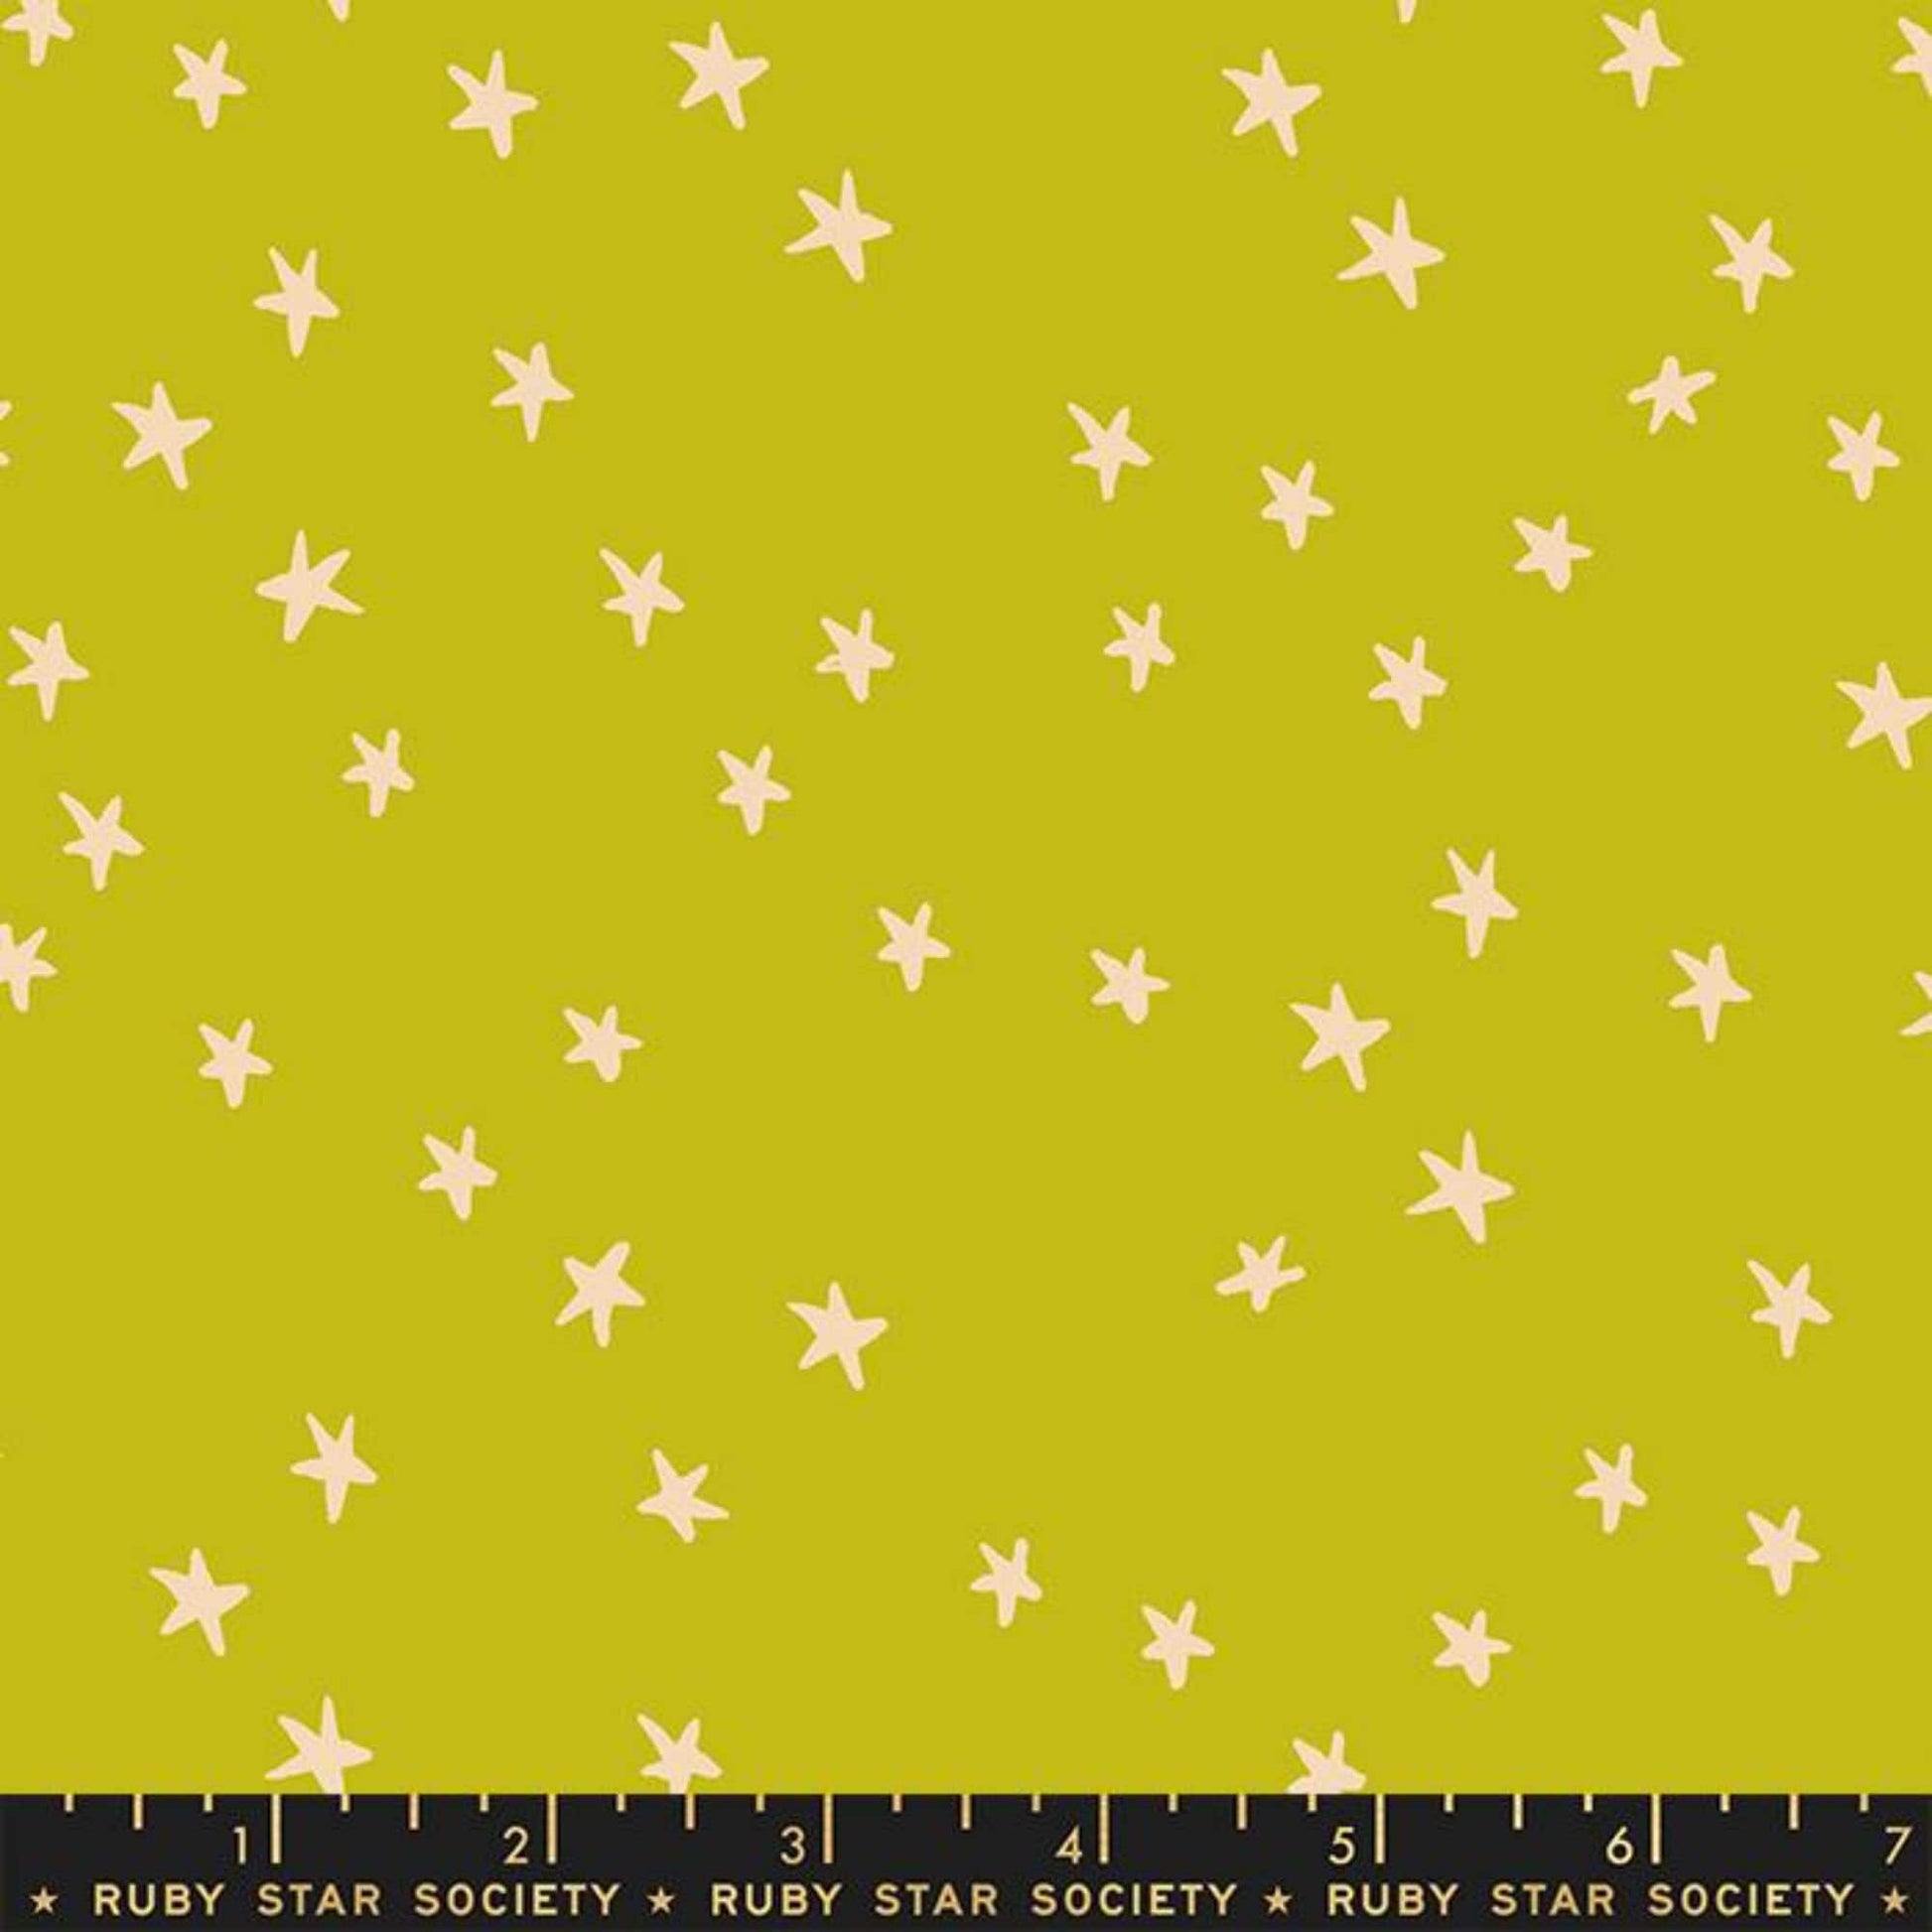 Starry Pistachio Starry Alexia Abegg Ruby Star Society Fabric Moda 100% Quilters Cotton RS4109 37 Fabric Fetish